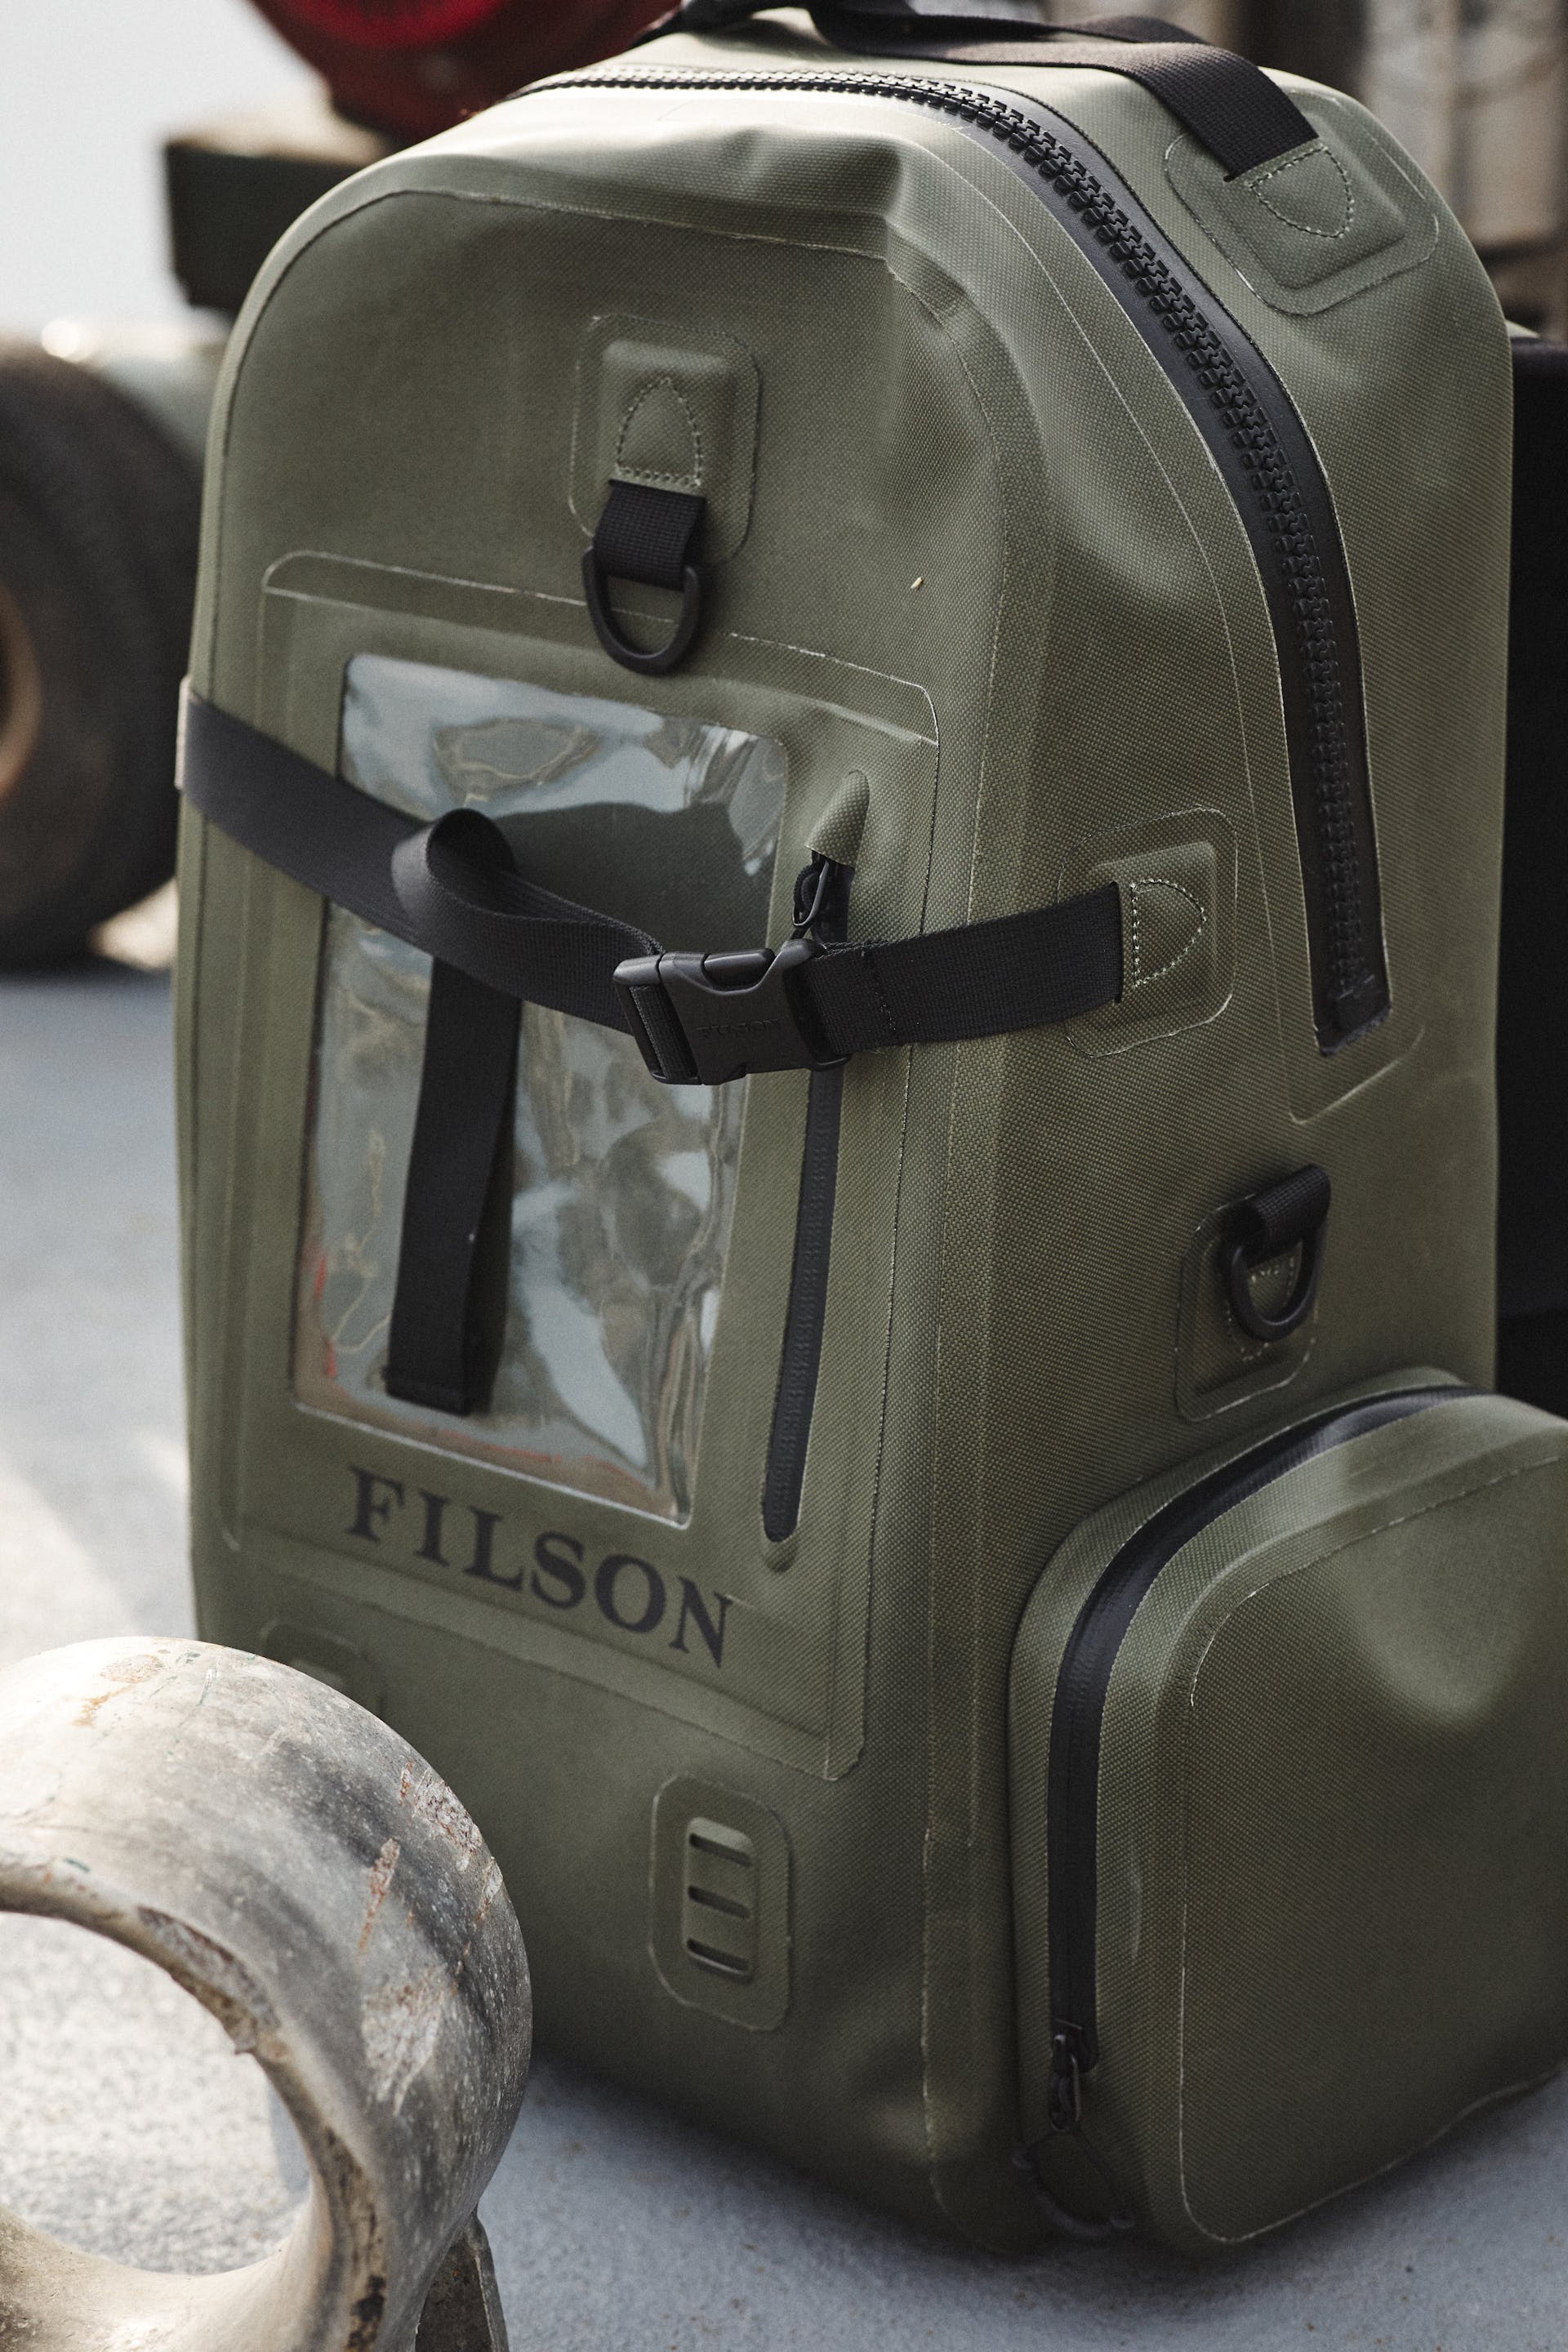 Filson Backpack Dry Bag in green sitting upright on a dock next to an engine